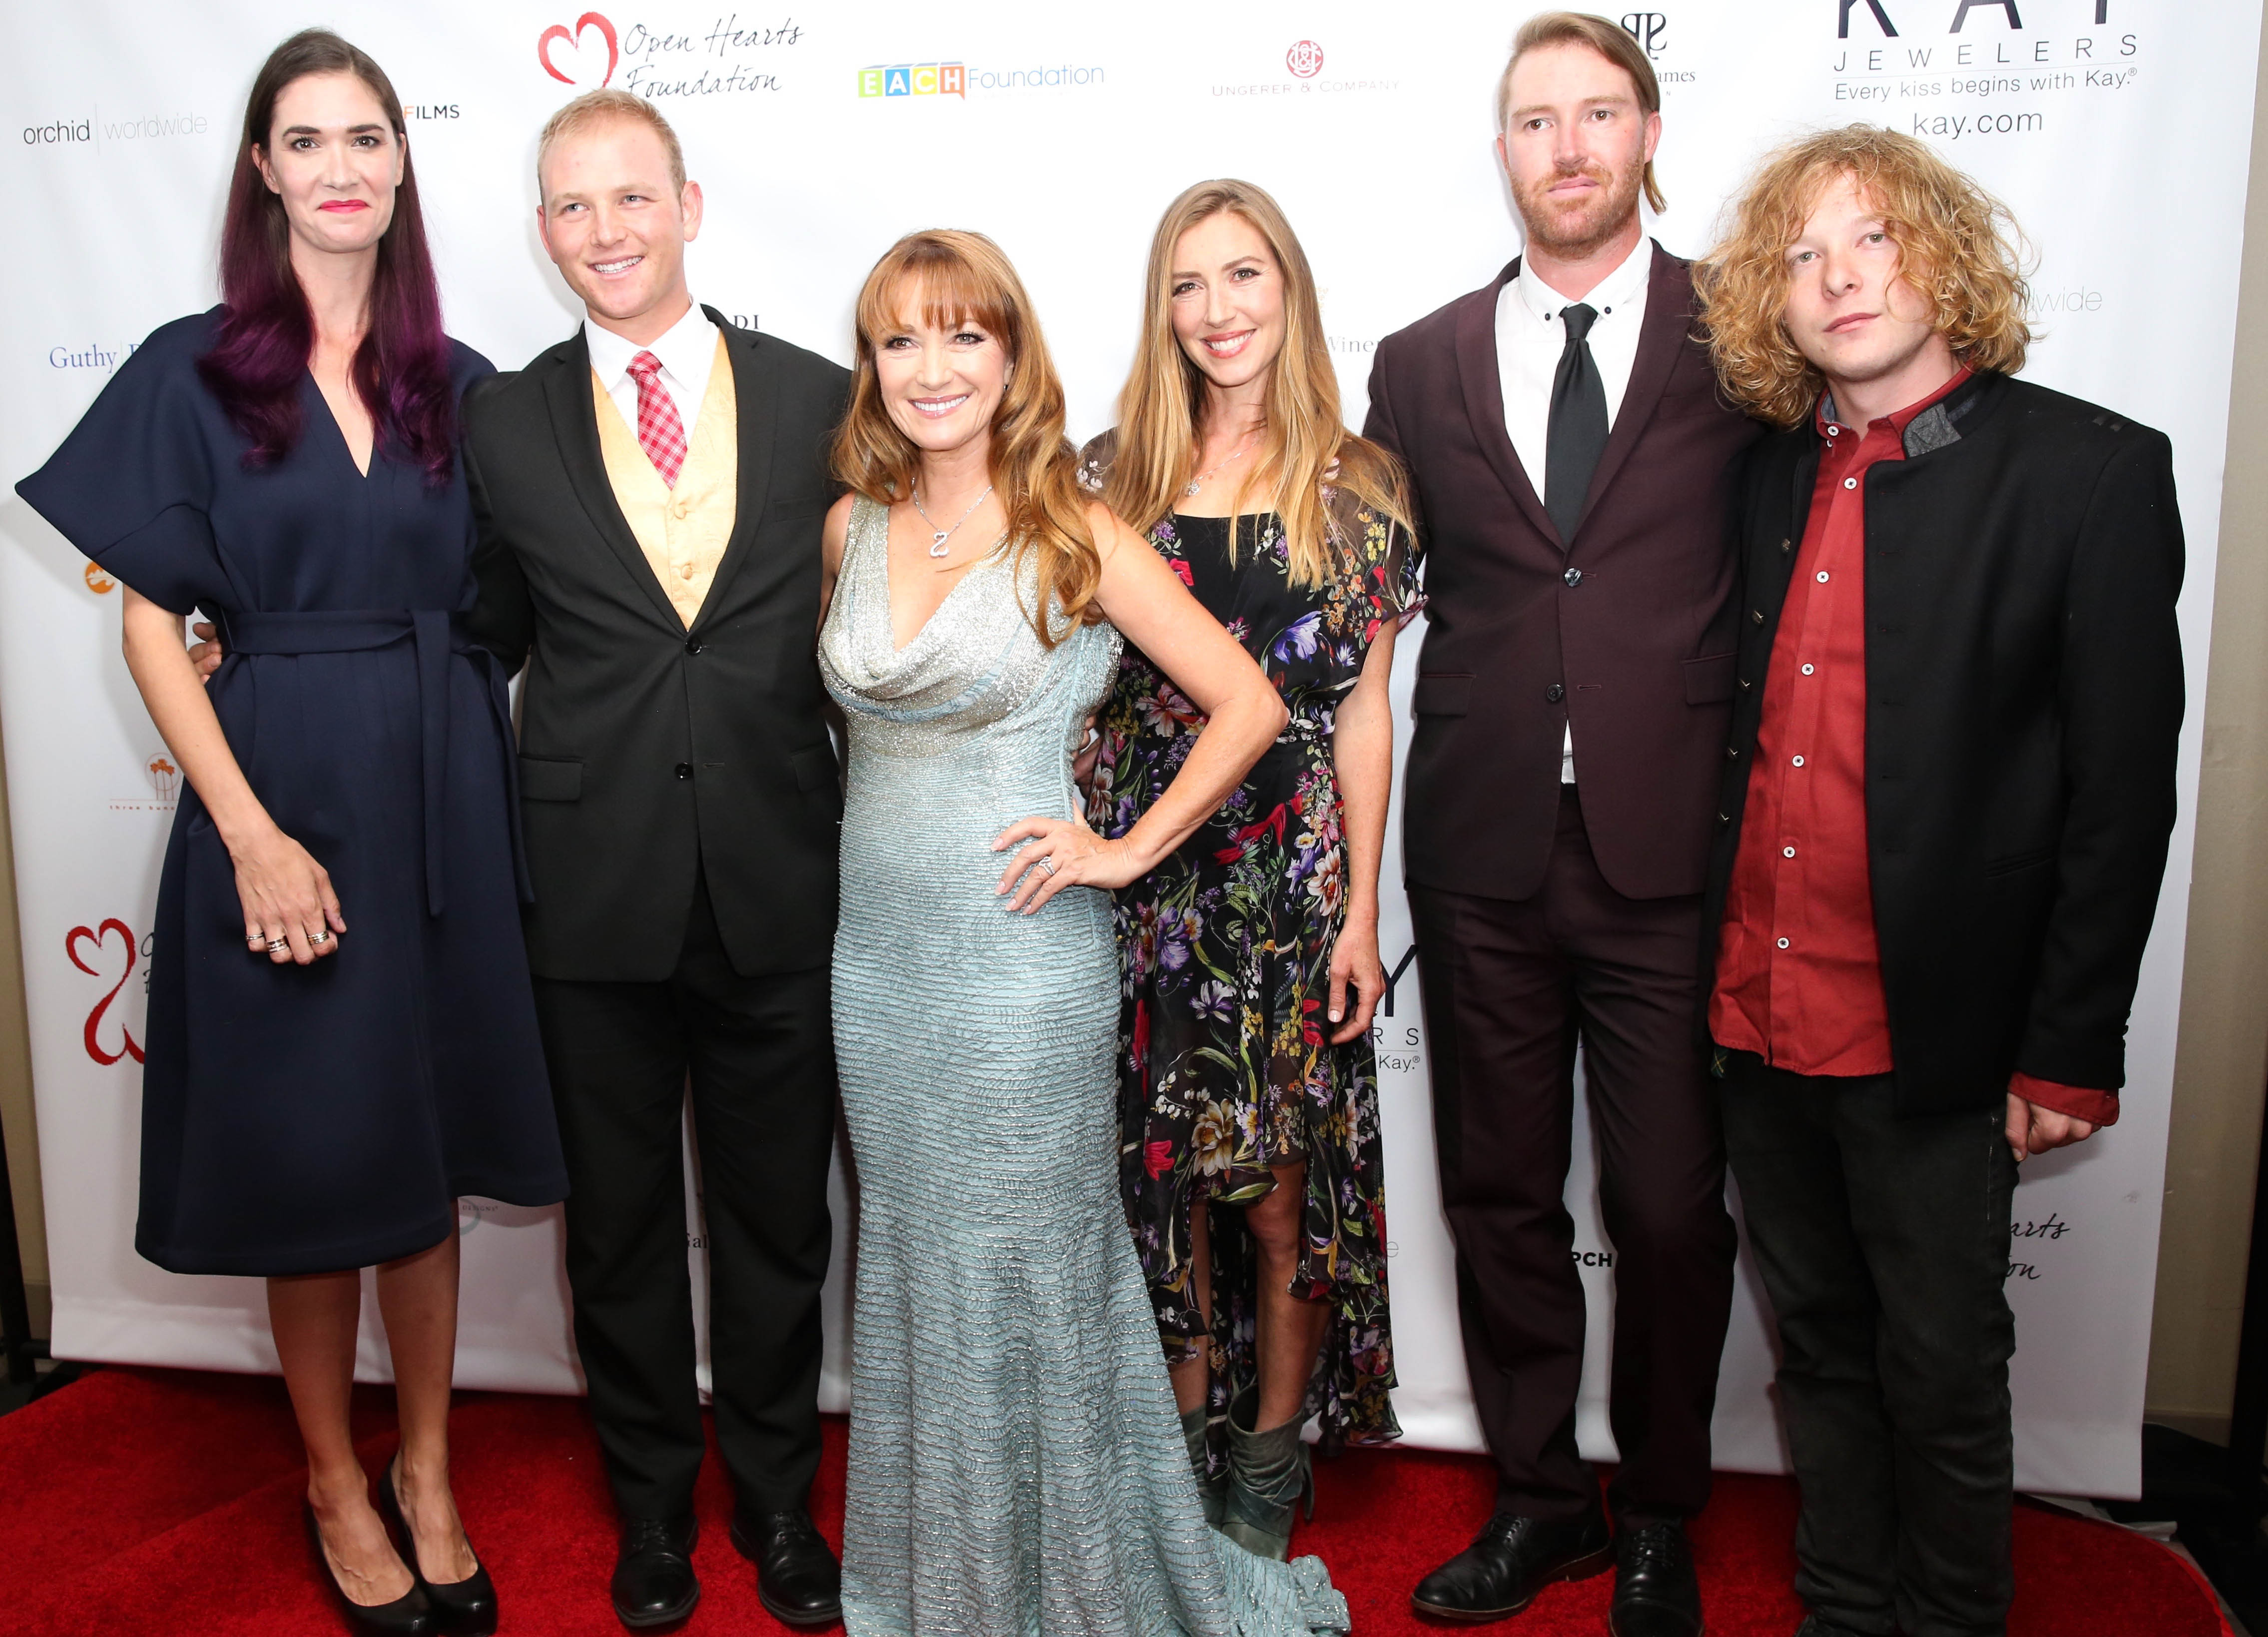 Jennifer Flynn, Kristopher Keach, Jane Seymour, Katie, Sean Flynn and John Keach at the 2017 Open Hearts Gala at SLS Hotel on October 21, 2017 in Beverly Hills, California. | Source: Getty Images